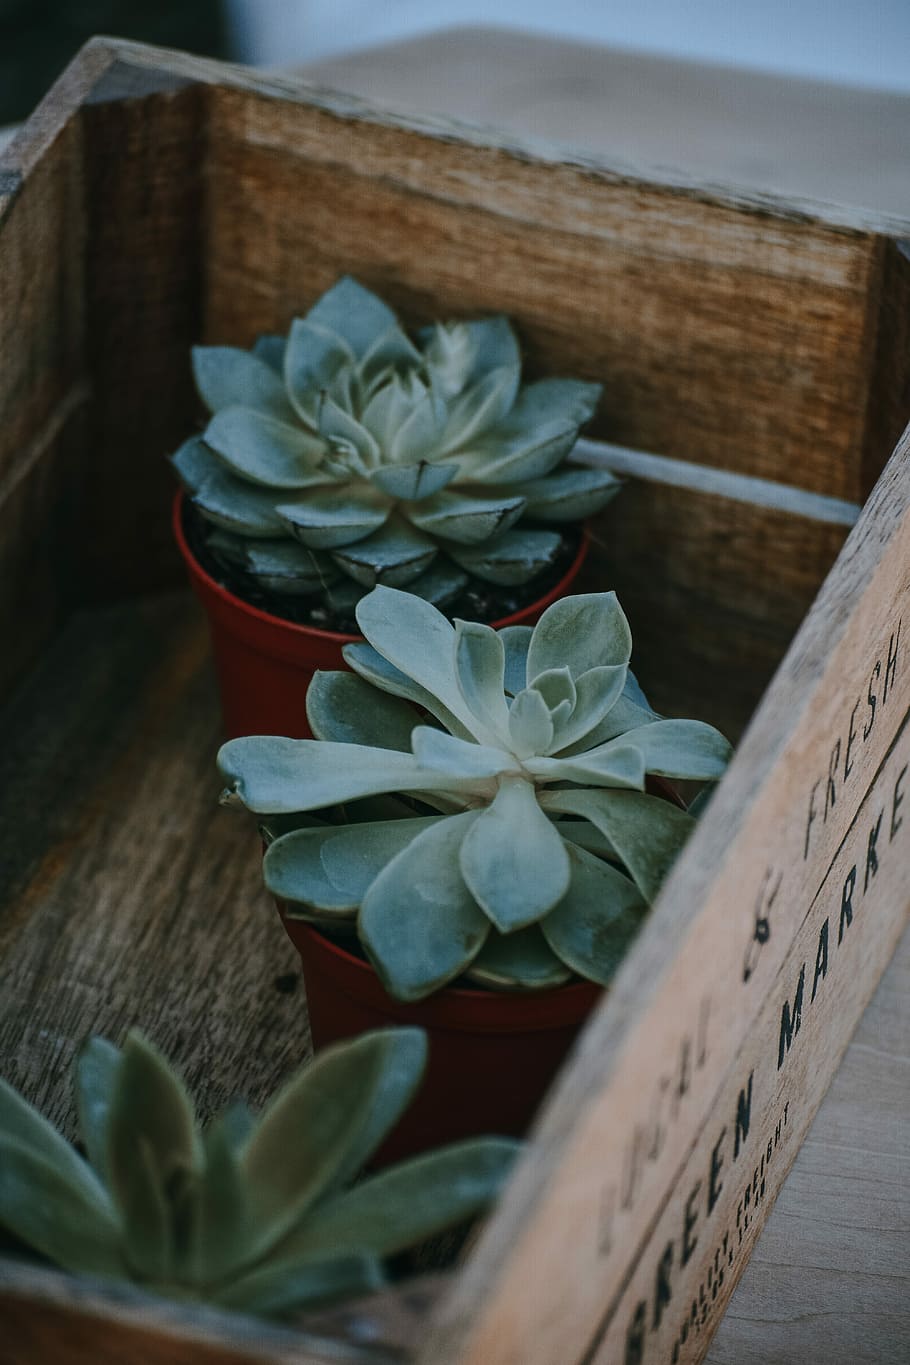 three green succulents in brown wooden crate, three red potted green succulent plant in borwn wooden crate